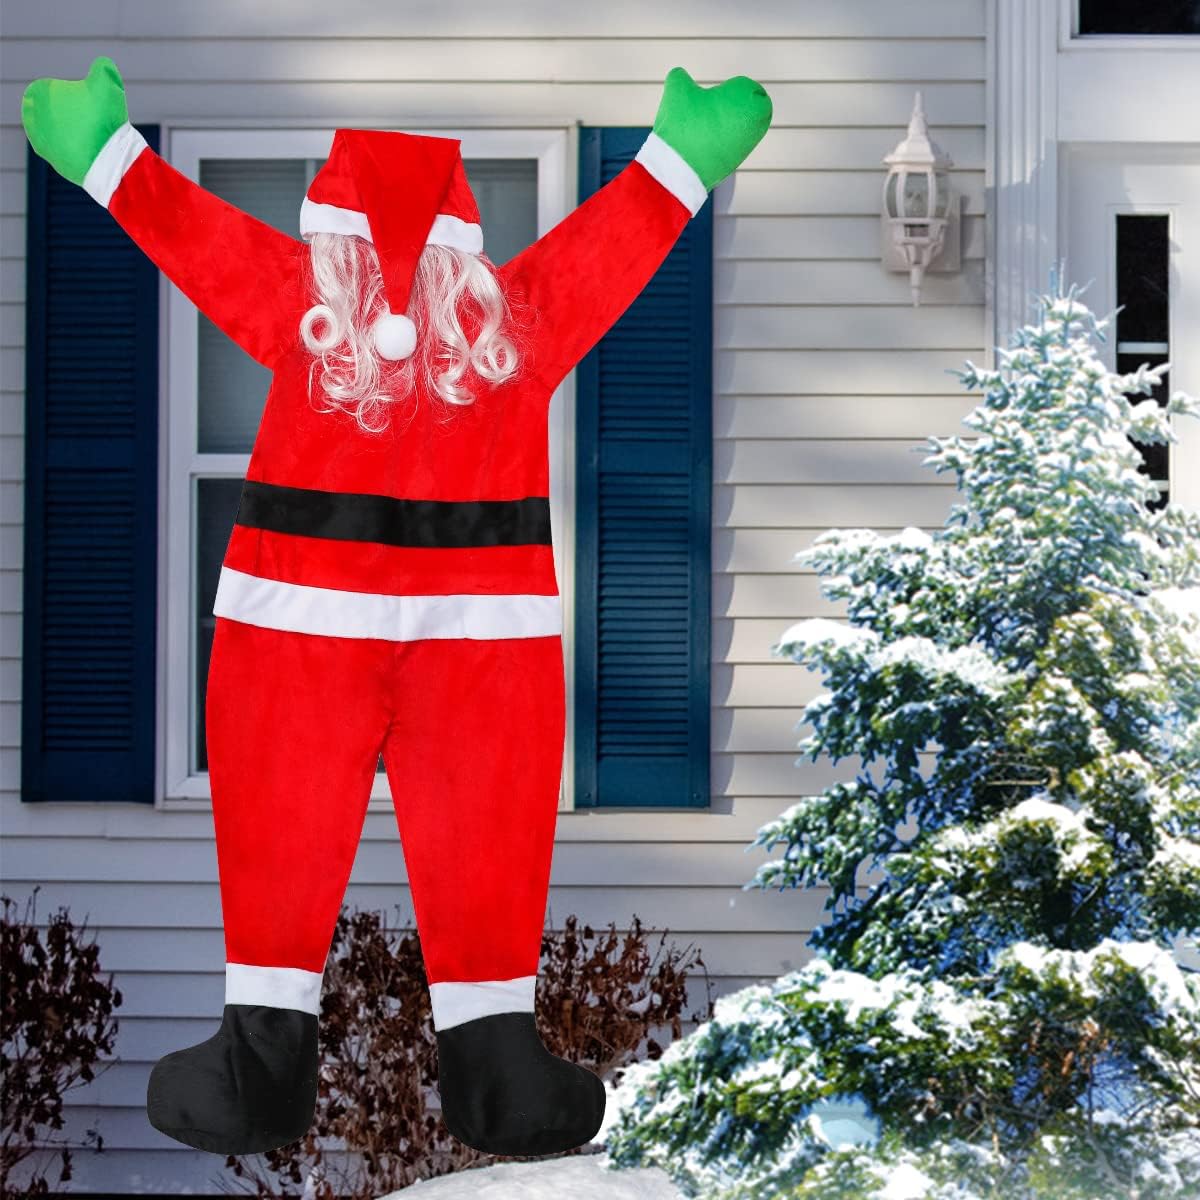 

1pc Large Hanging Christmas Santa Claus Decorations, 66.9'' Christmas Ornaments Hanging Santa Christmas Decoration From The Gutter Roof Outdoor Yard Decor Indoor Home Wall Car 5.5ft